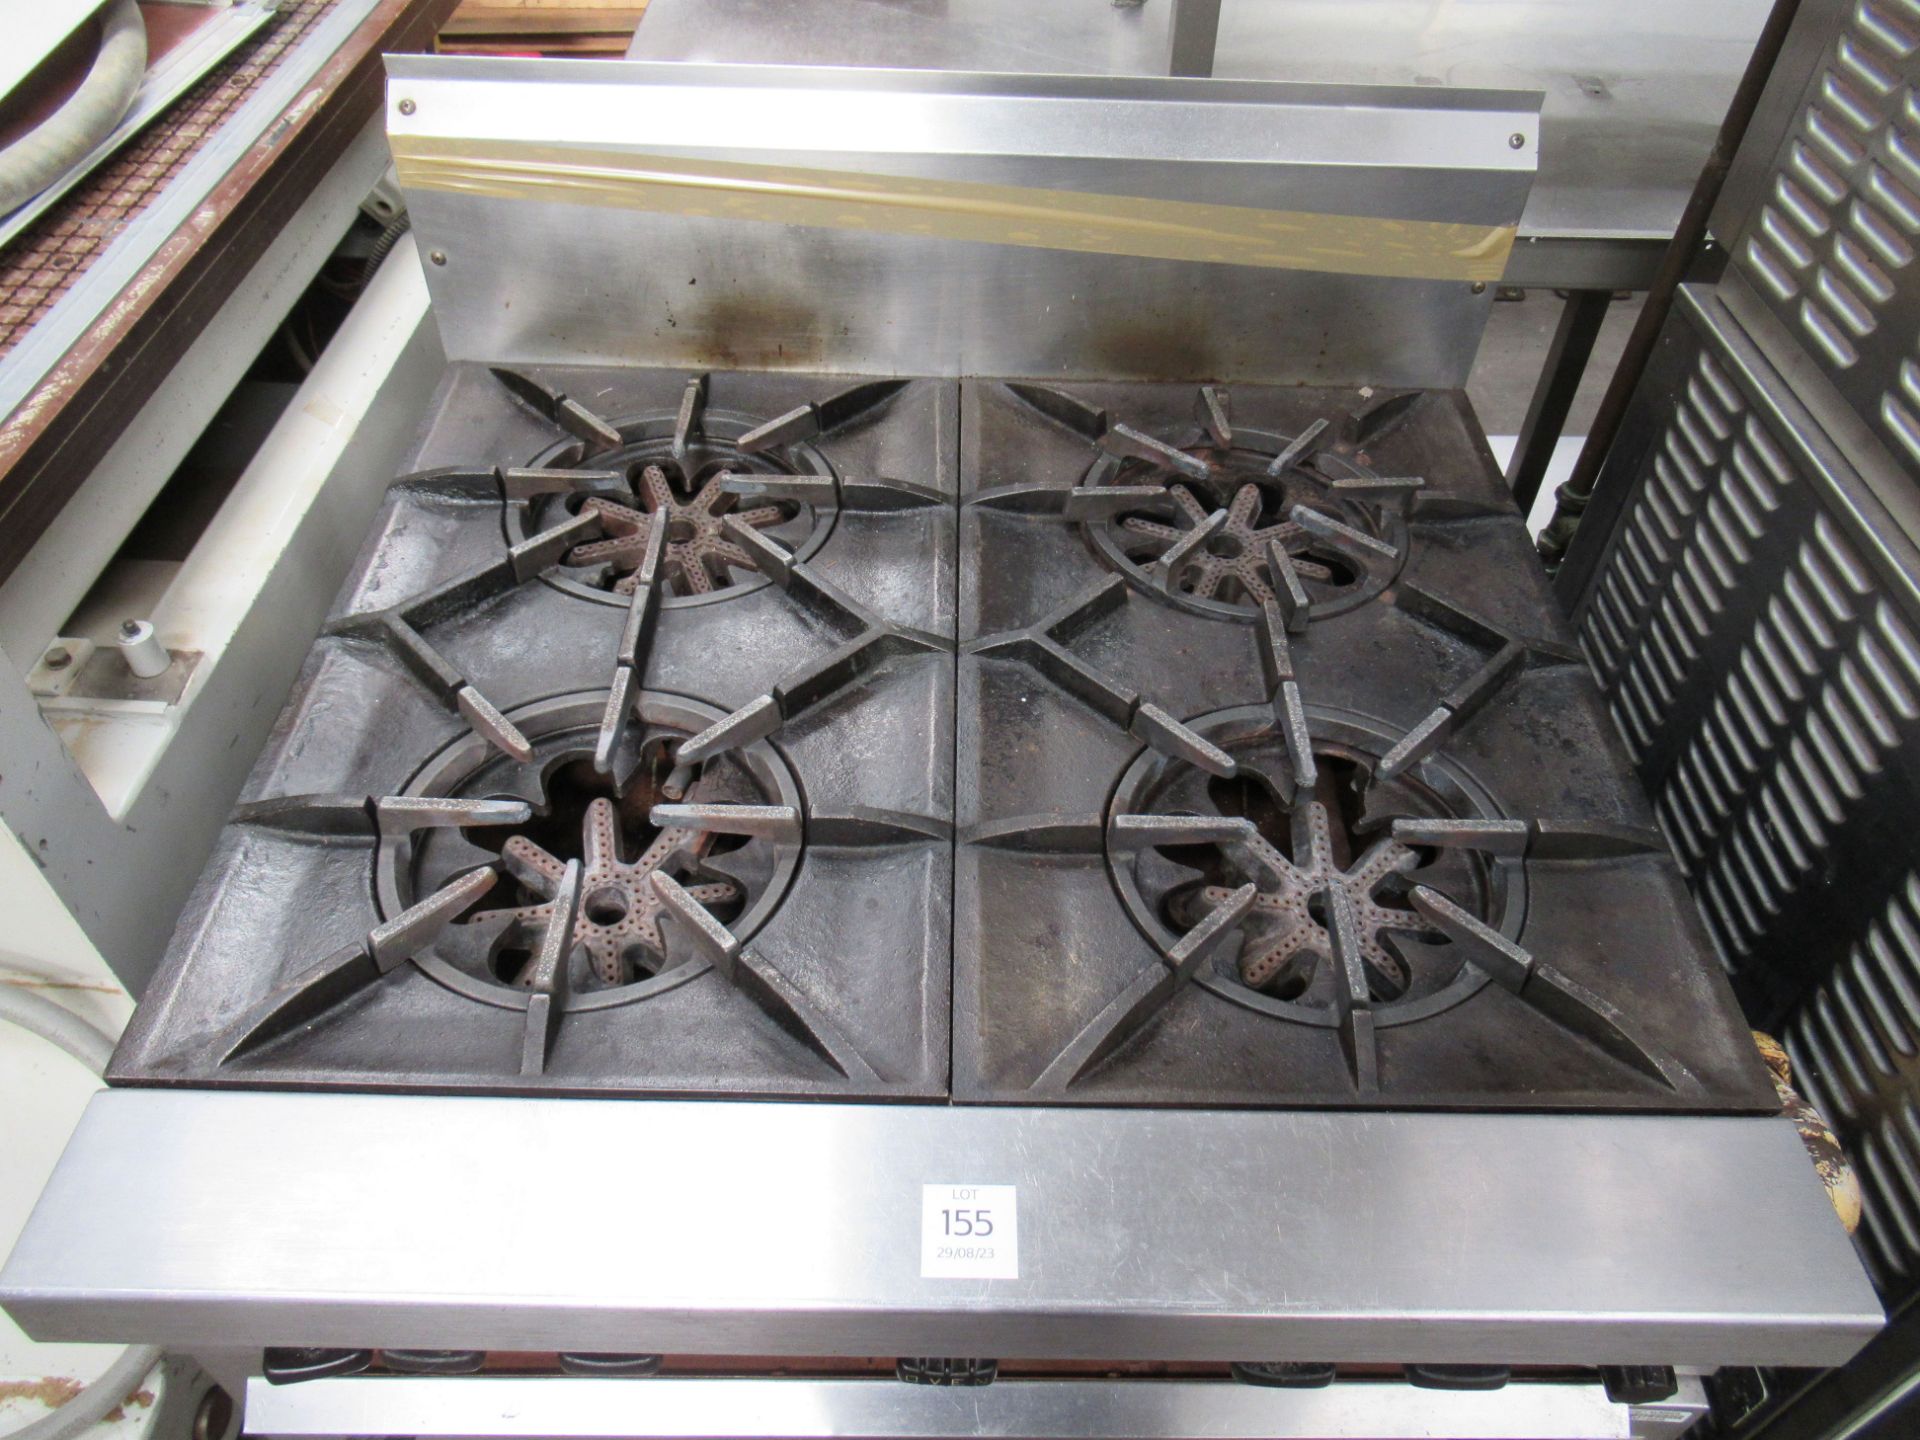 Garland Stainless Steel Gas Powered Oven with 4 Gas Burners - Image 3 of 3